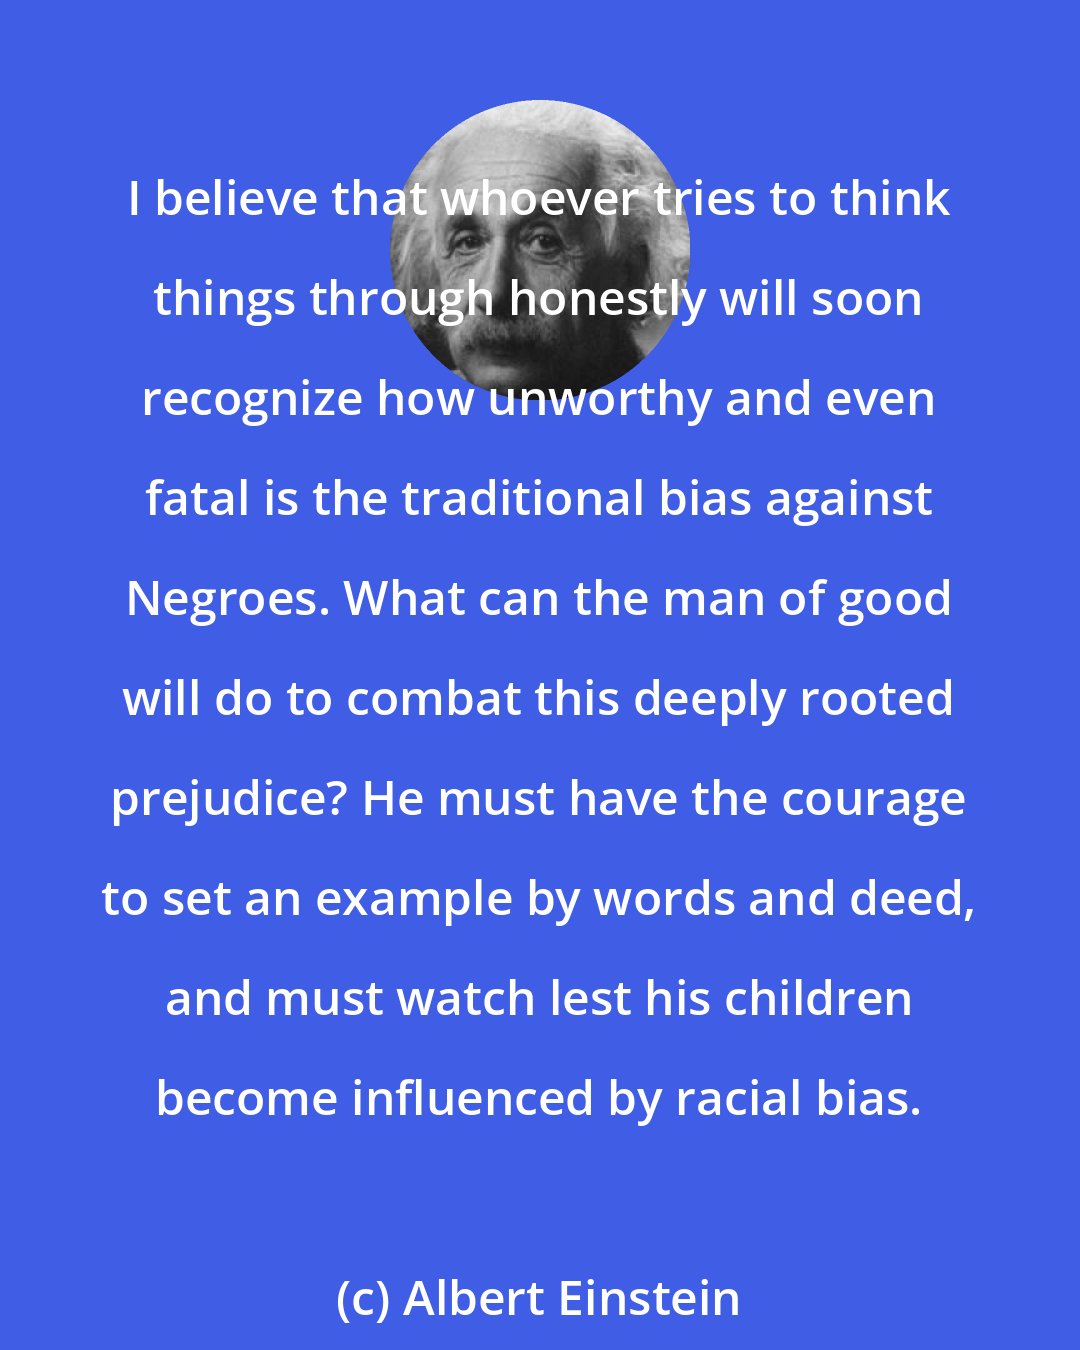 Albert Einstein: I believe that whoever tries to think things through honestly will soon recognize how unworthy and even fatal is the traditional bias against Negroes. What can the man of good will do to combat this deeply rooted prejudice? He must have the courage to set an example by words and deed, and must watch lest his children become influenced by racial bias.